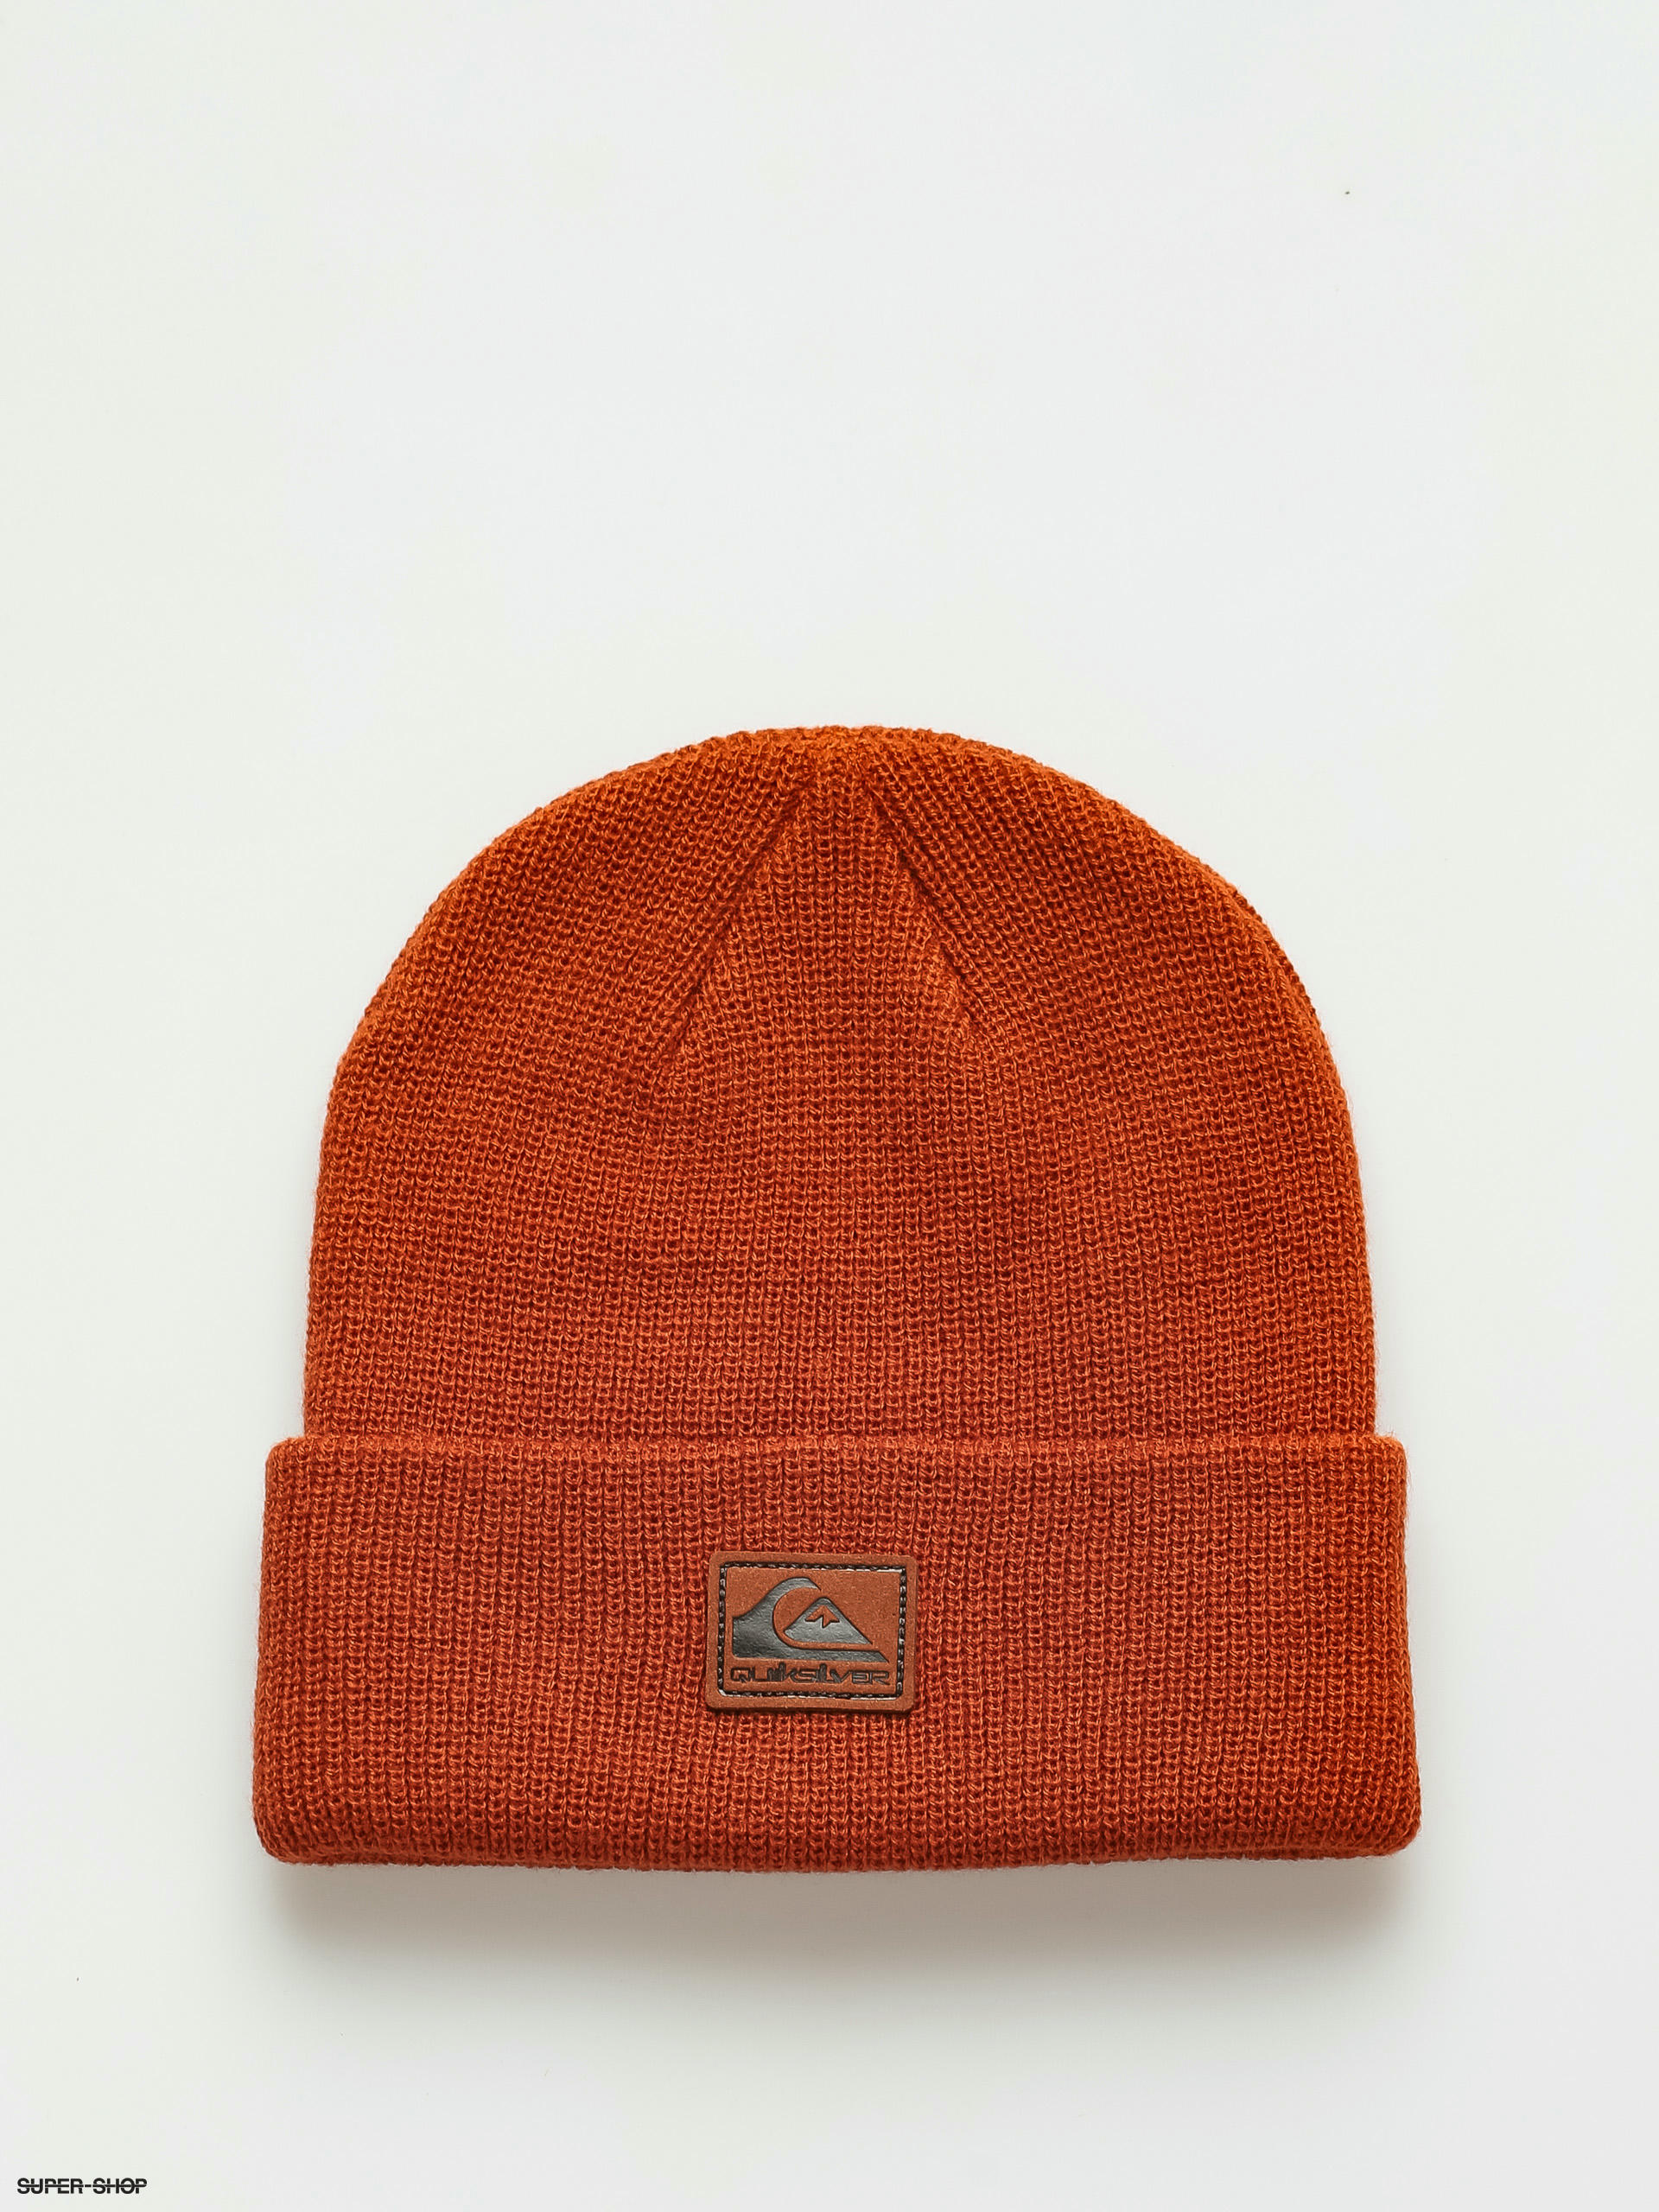 Quiksilver (bombay Performer 2 Beanie brown)